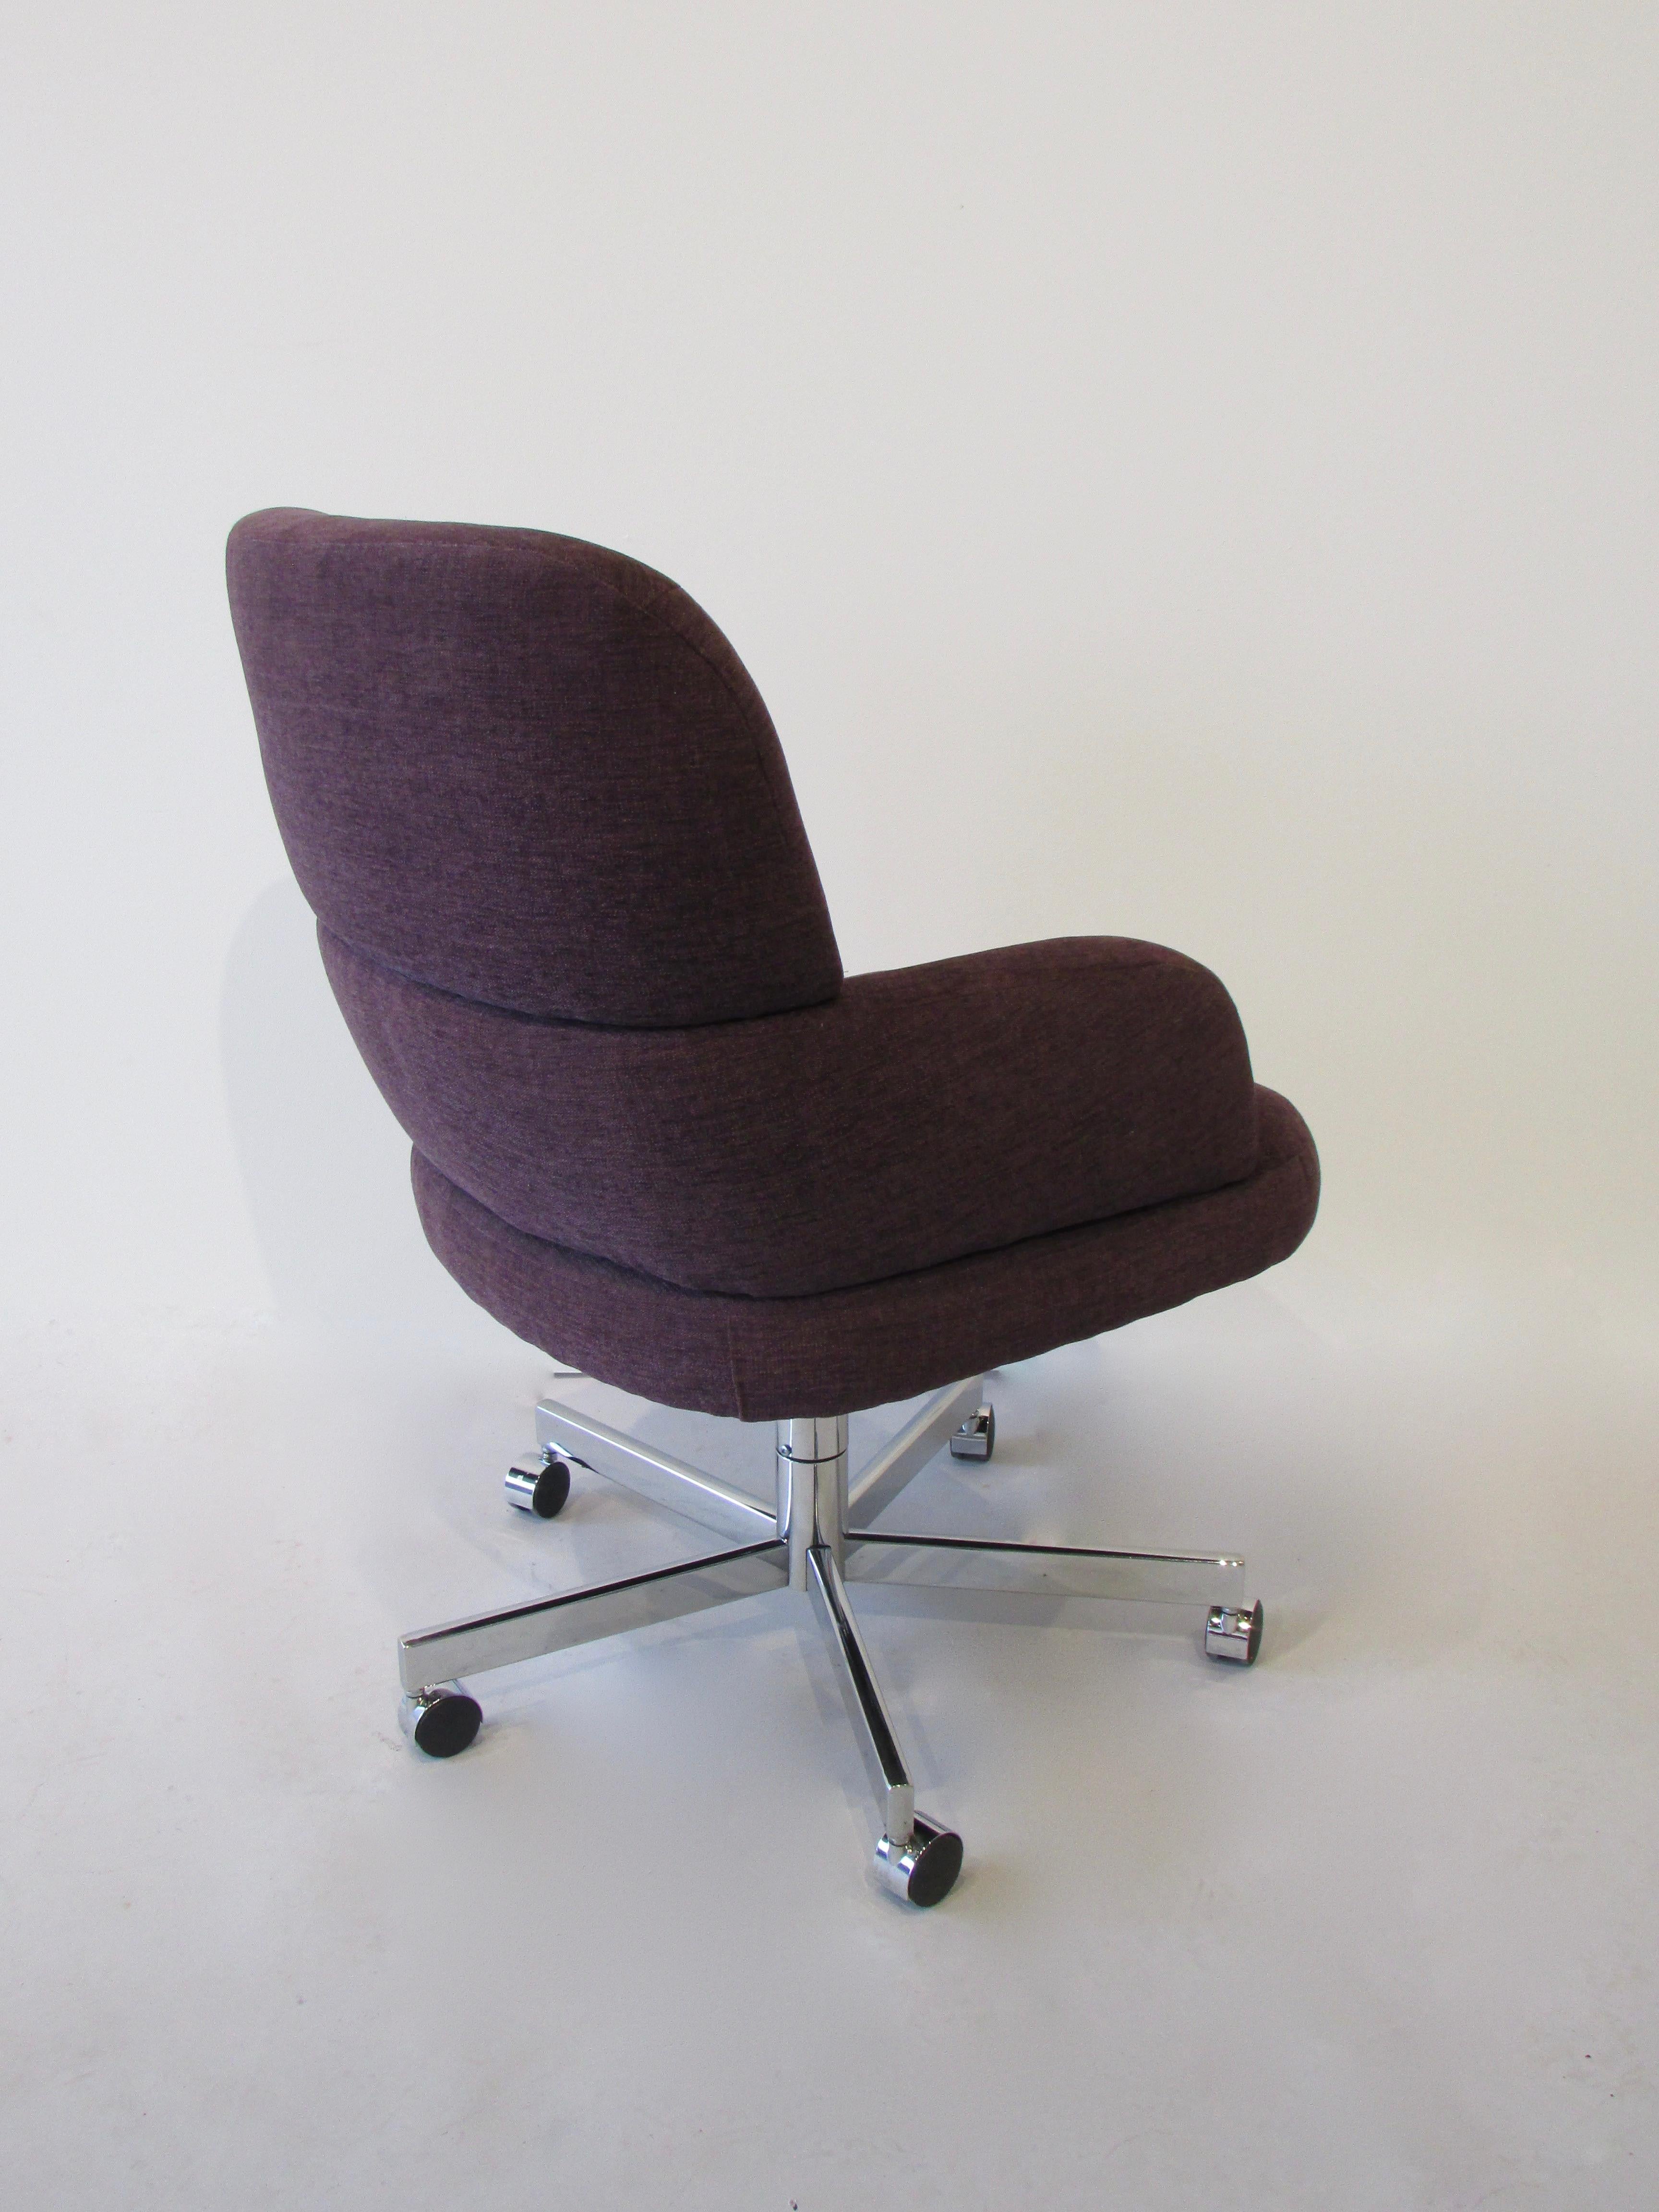 Swivel and tilt office desk chair on casters. Purple textile in channeled style upholstery.